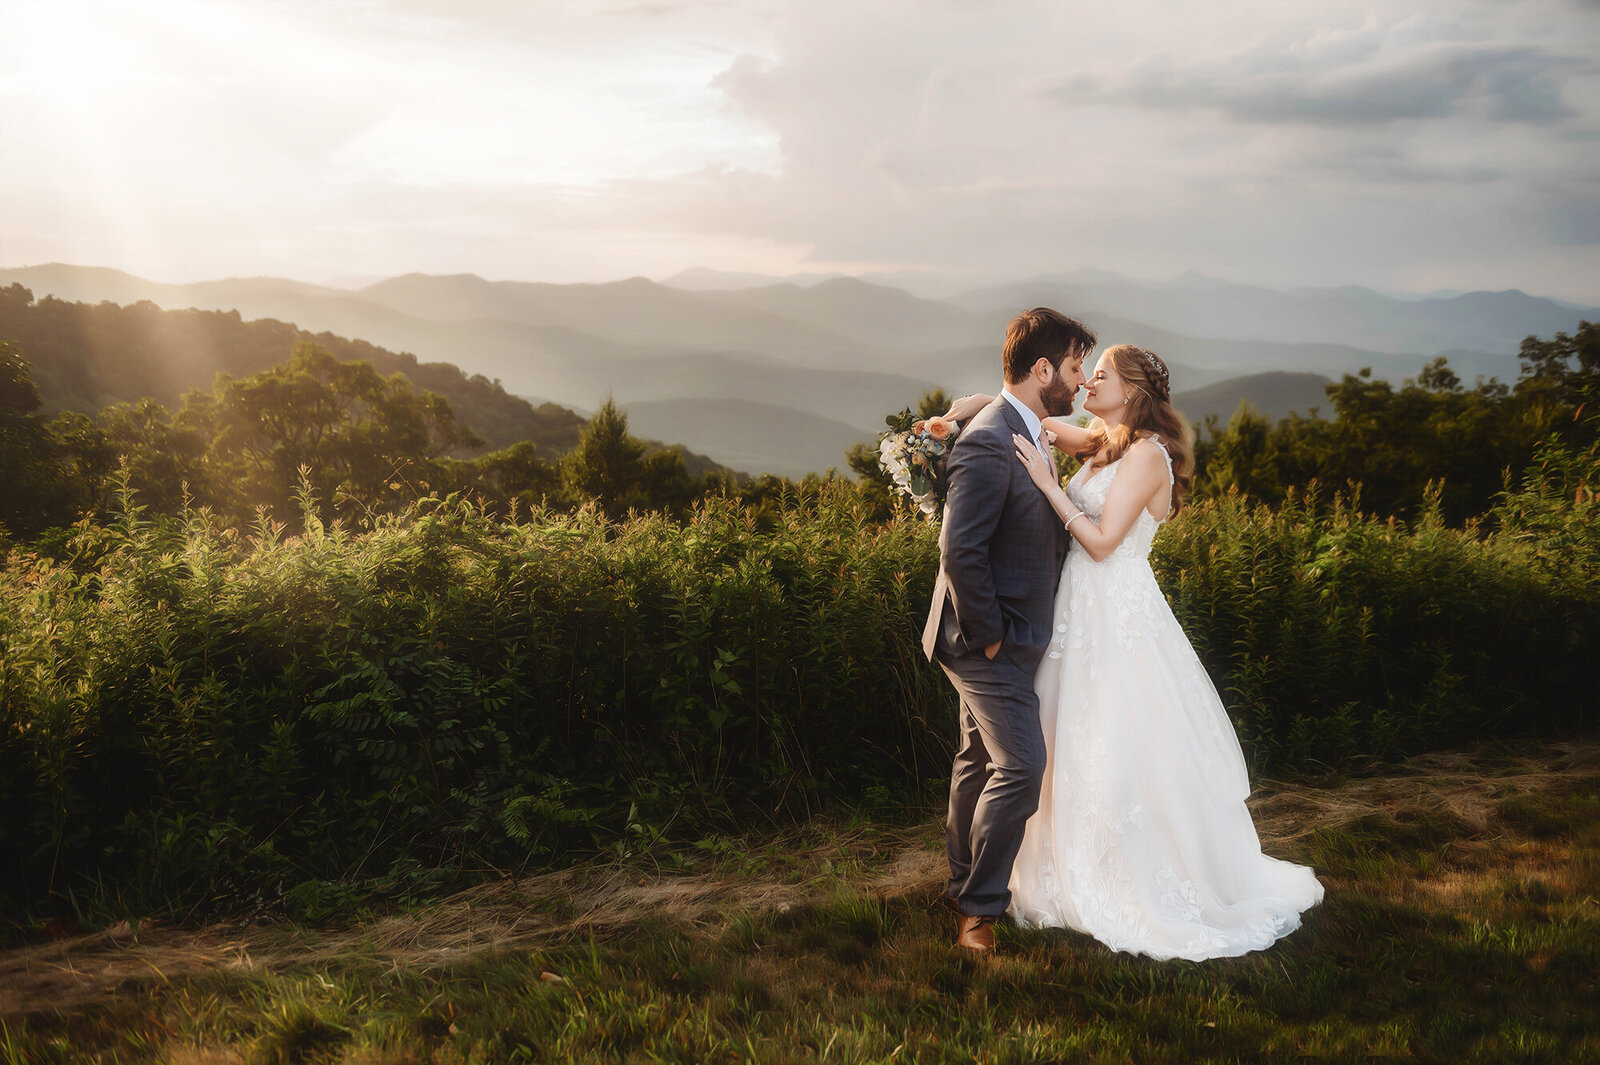 Bride and Groom kiss during their Elopement on the Blue Ridge Parkway in Asheville, NC.